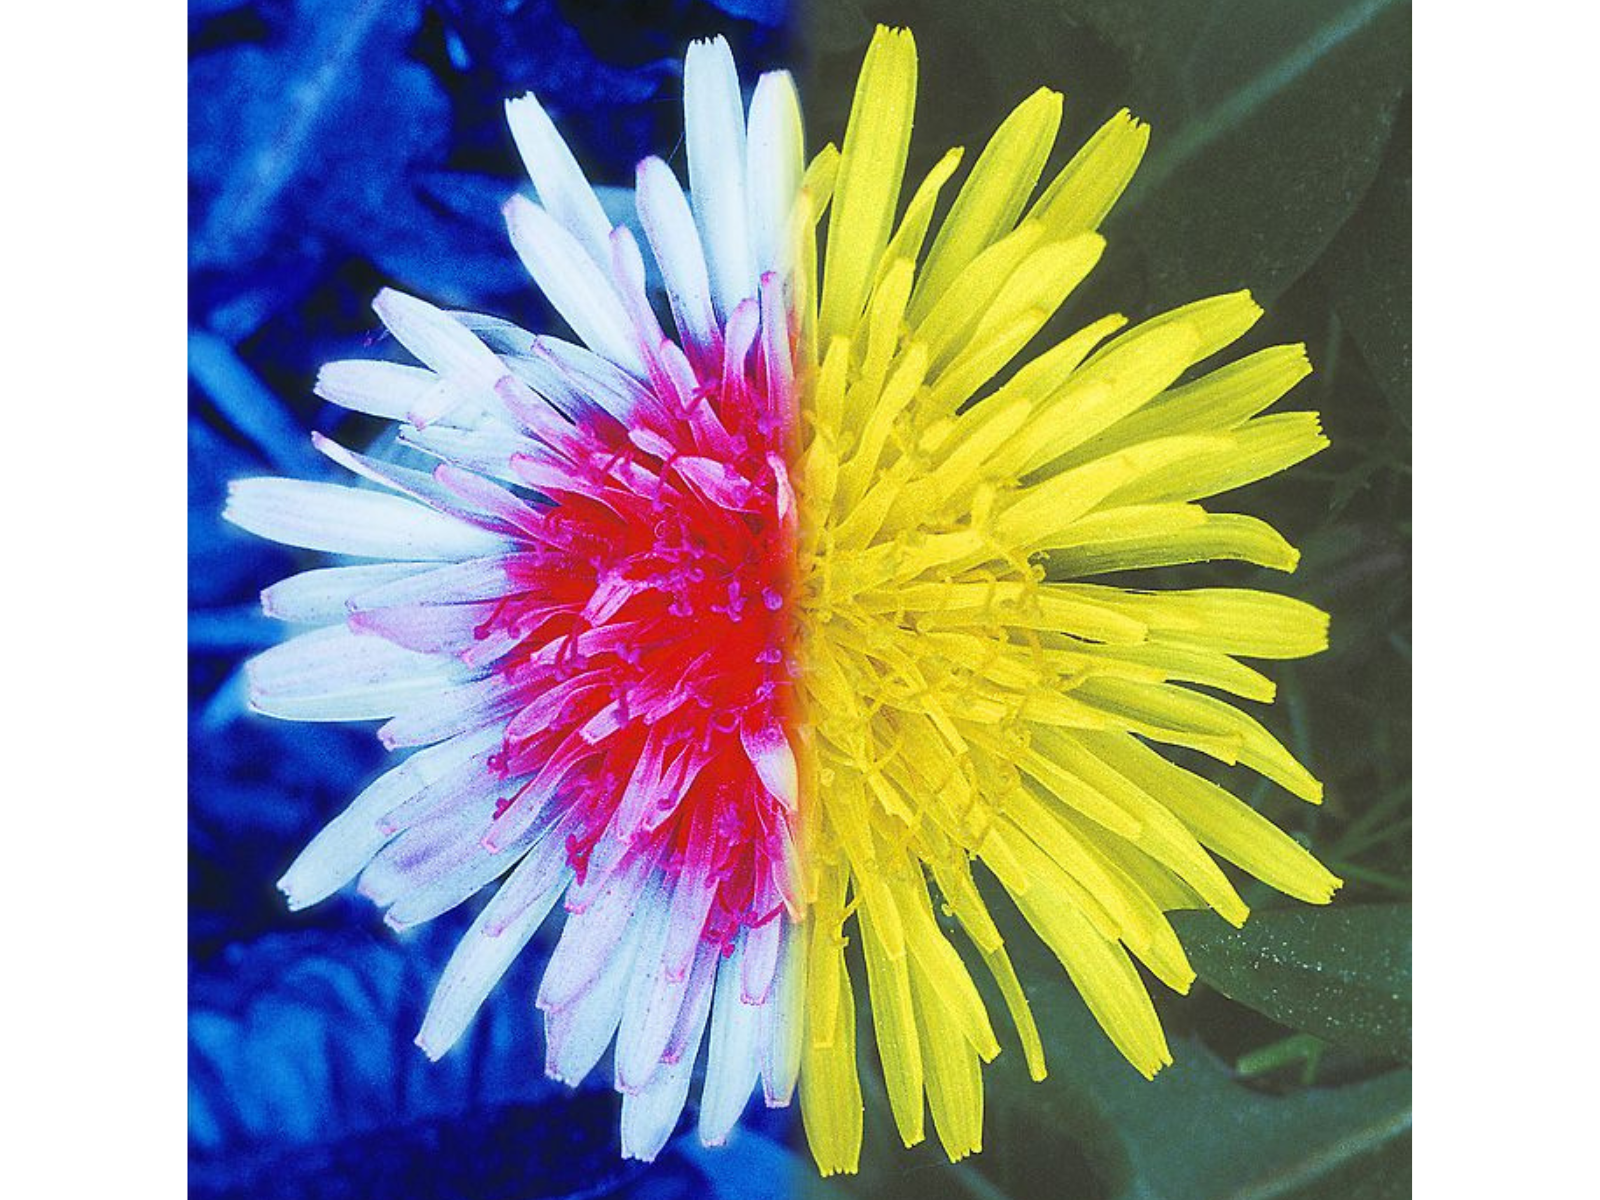 Close-up on a dandelion flower. On the right half of the image the flower is yellow, however on the left side it is shown under blue light, leaving the centre of the flower bright pink and the outer portions of the petals white.